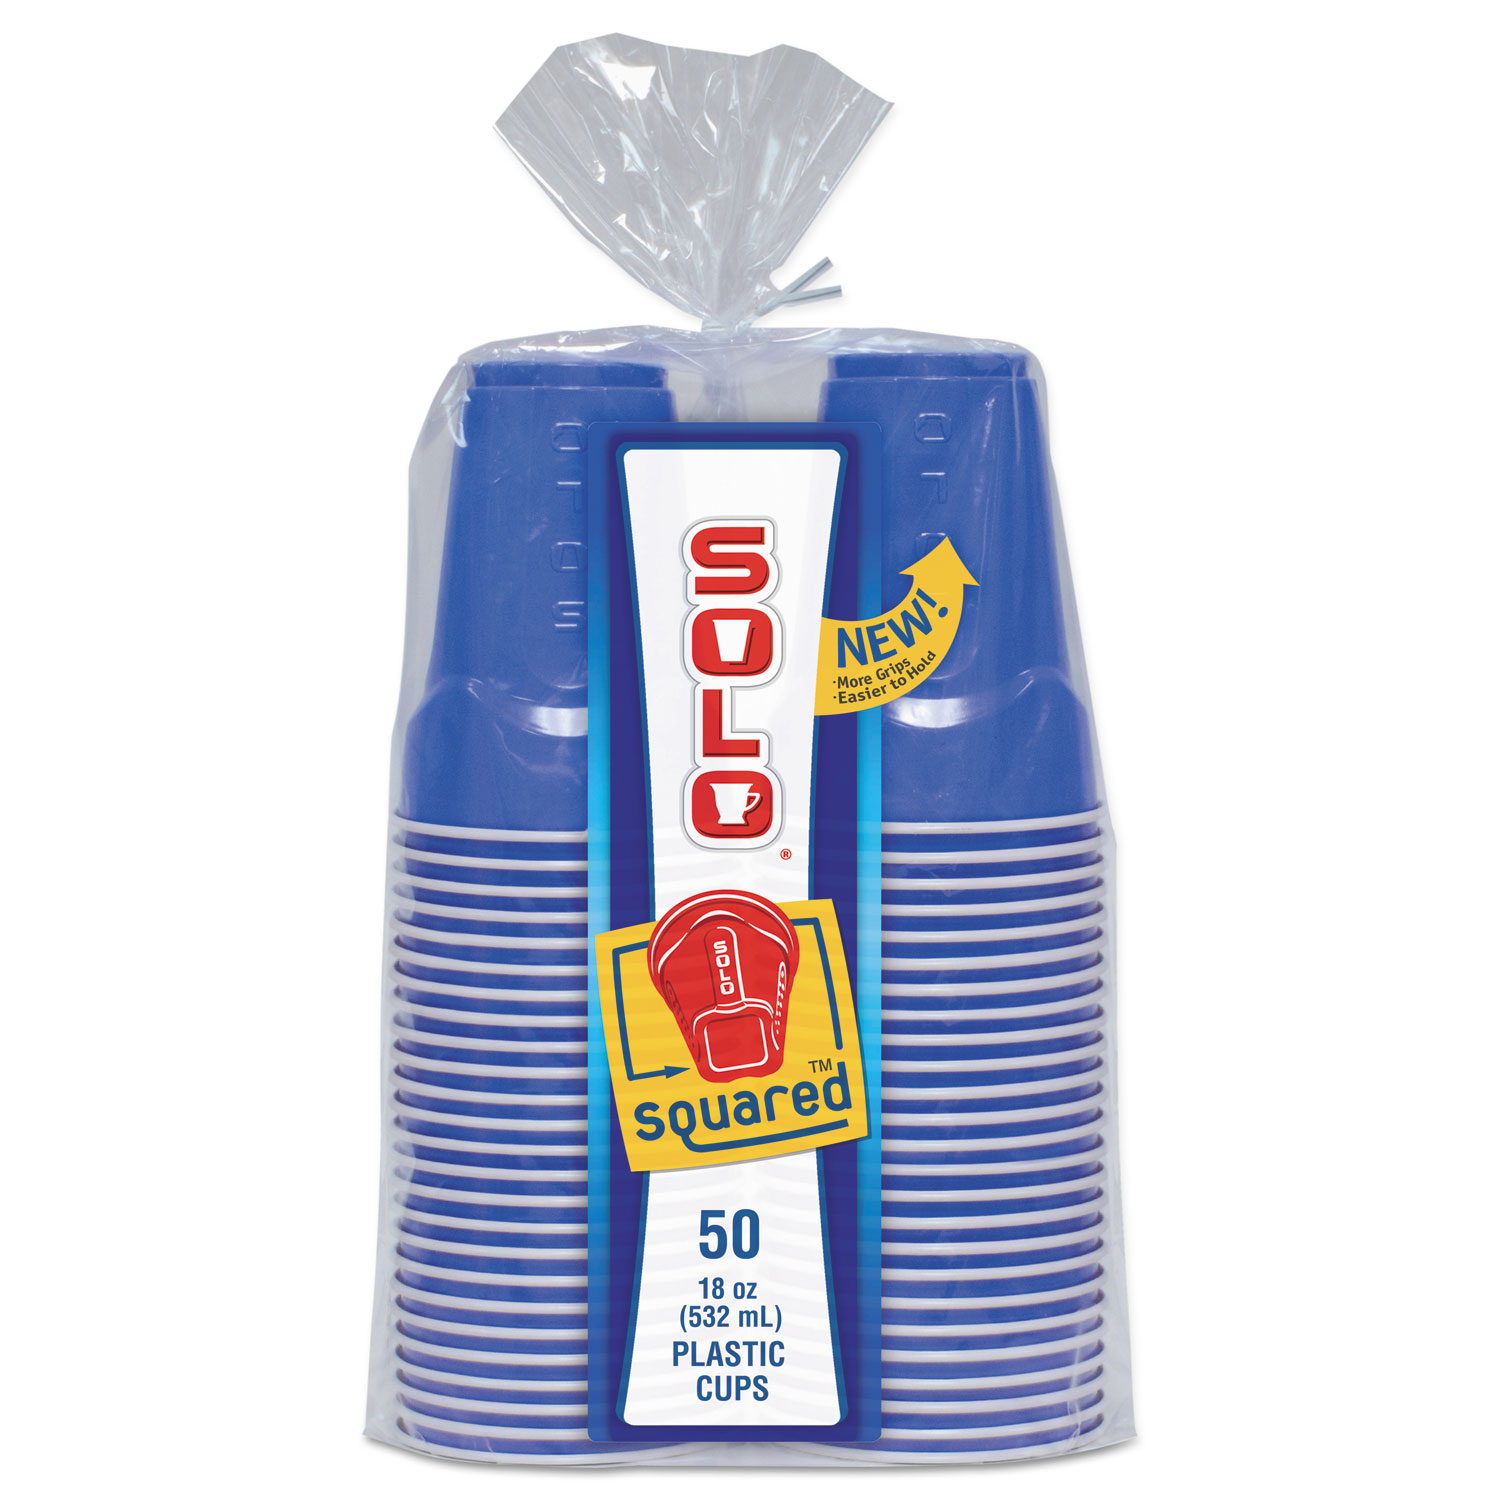 SOLO Squared Plastic Party Cups, 18 oz, Red & Blue, 50/Bag, 12 Bag/Carton